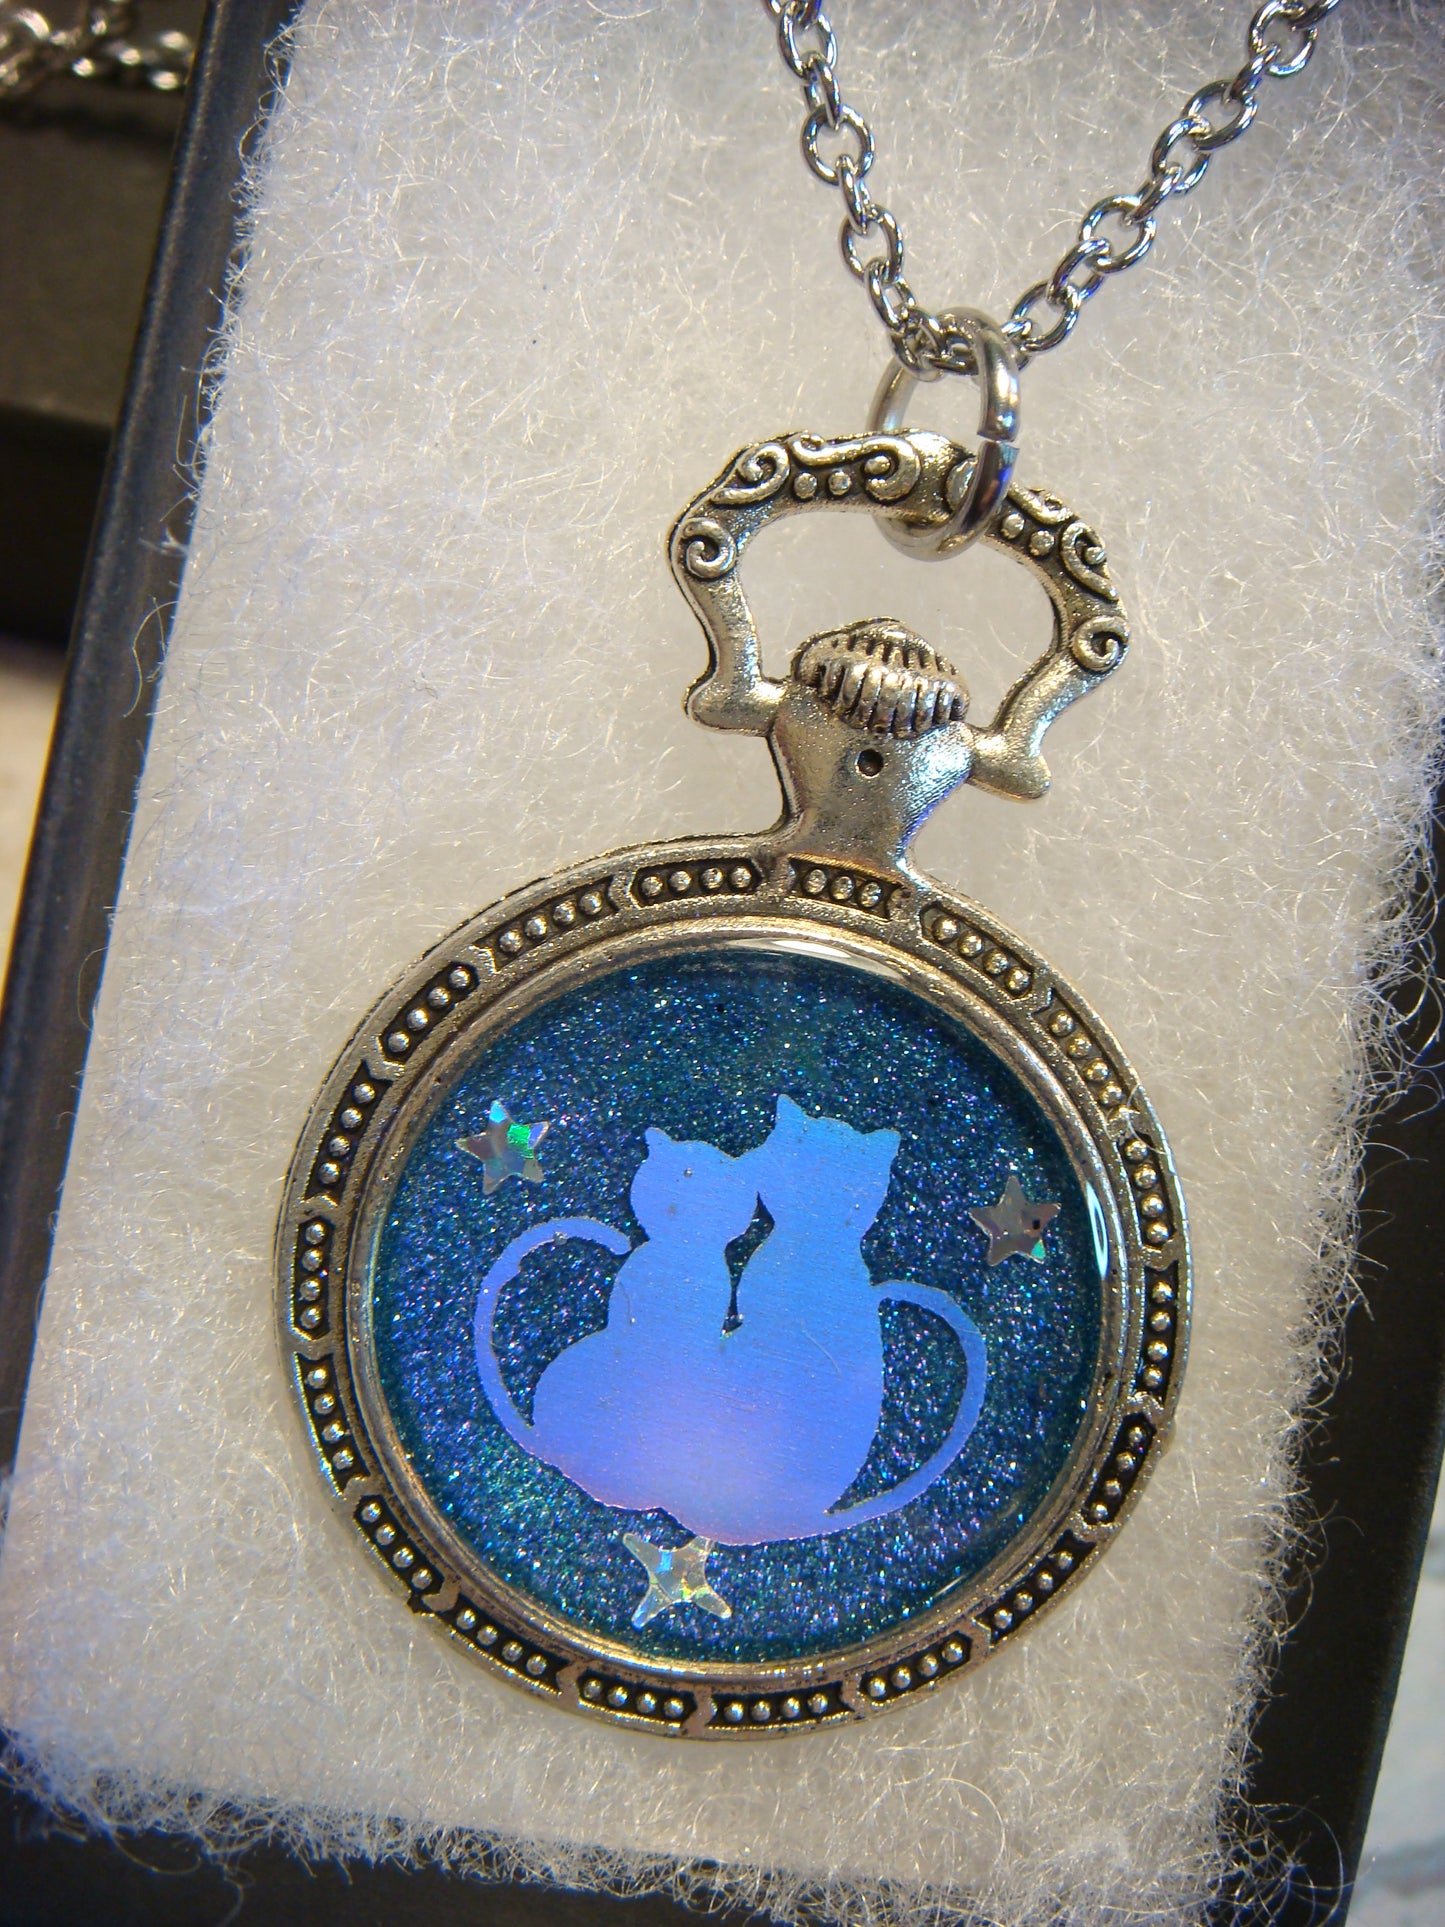 Snuggling Cats with Stars Pocket Watch Pendant Necklace